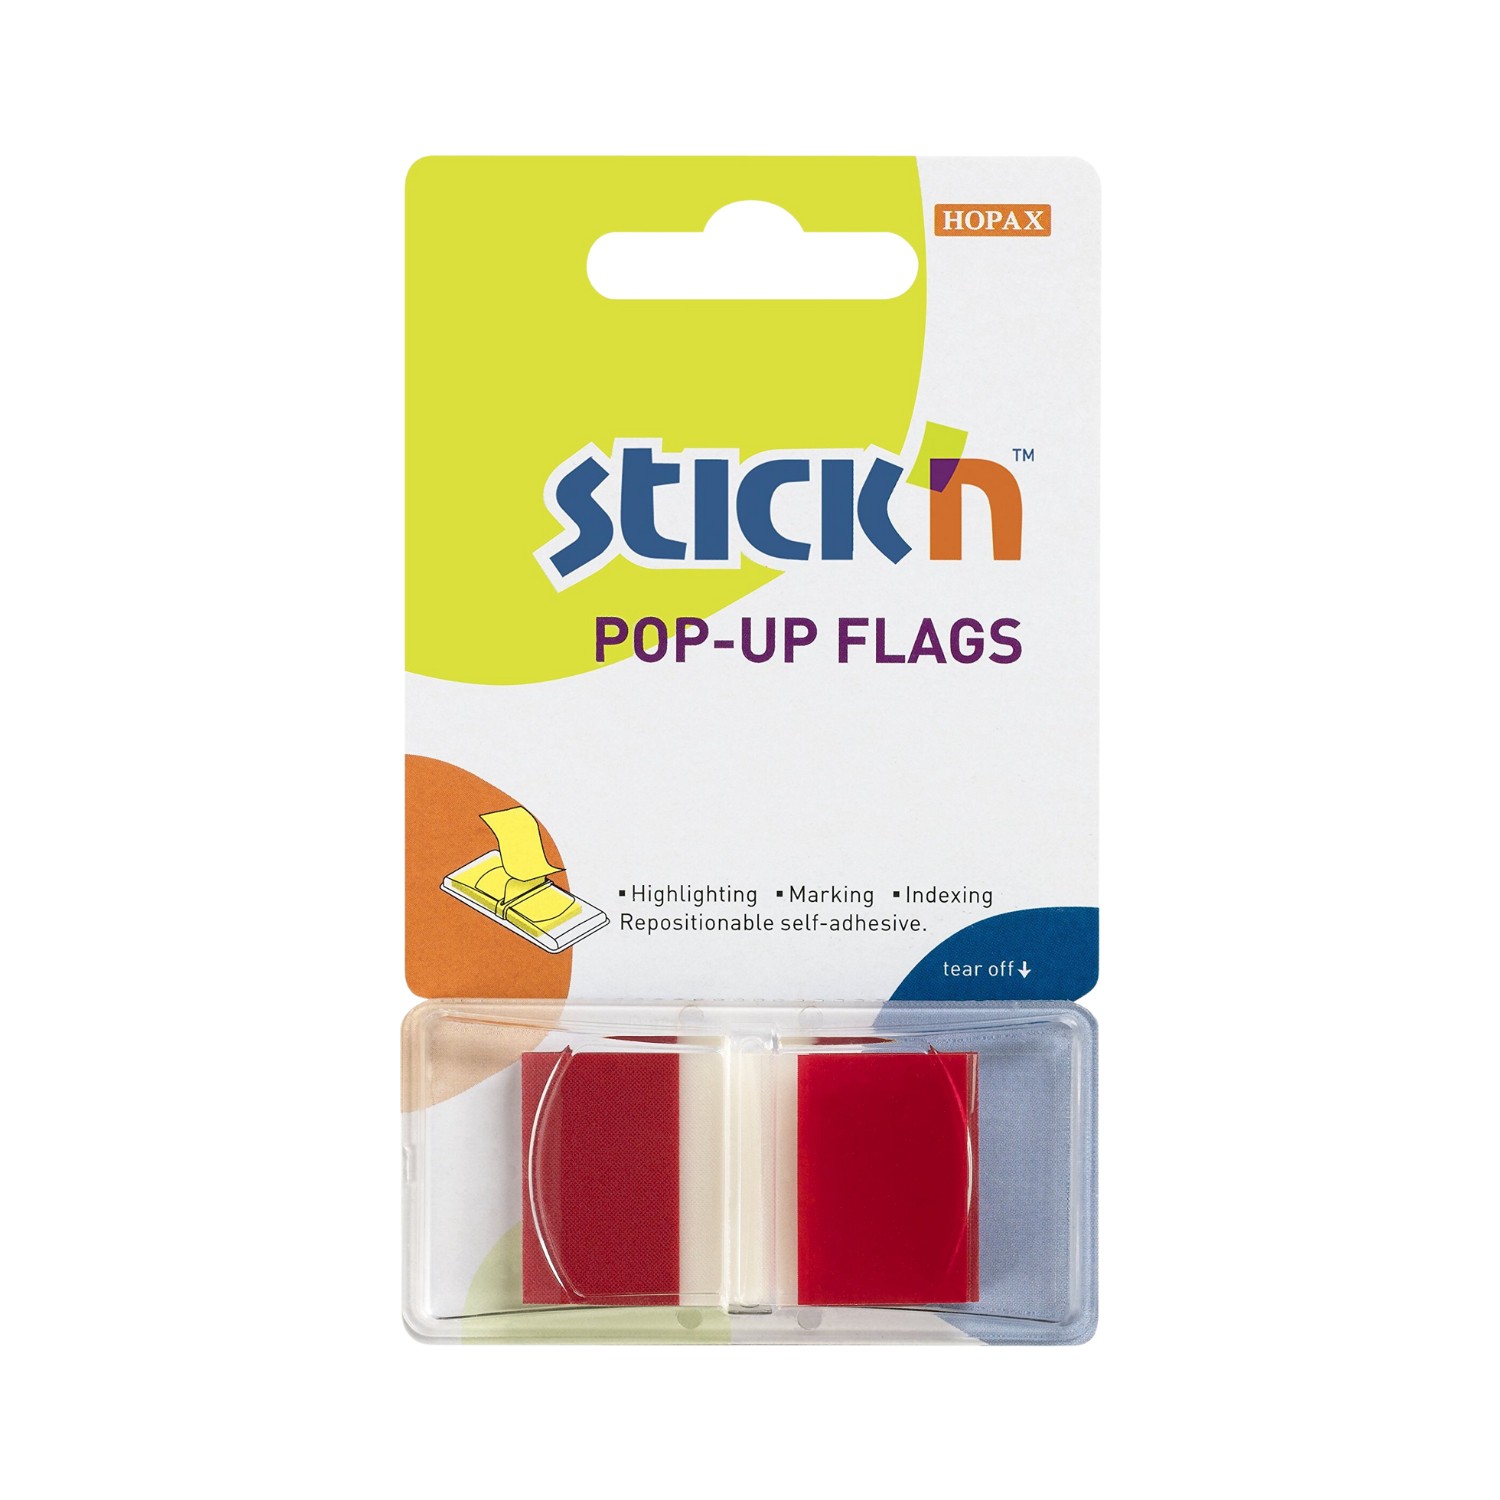 Stick+%27n+Pop-Up+Flags+45+x+25mm+Red